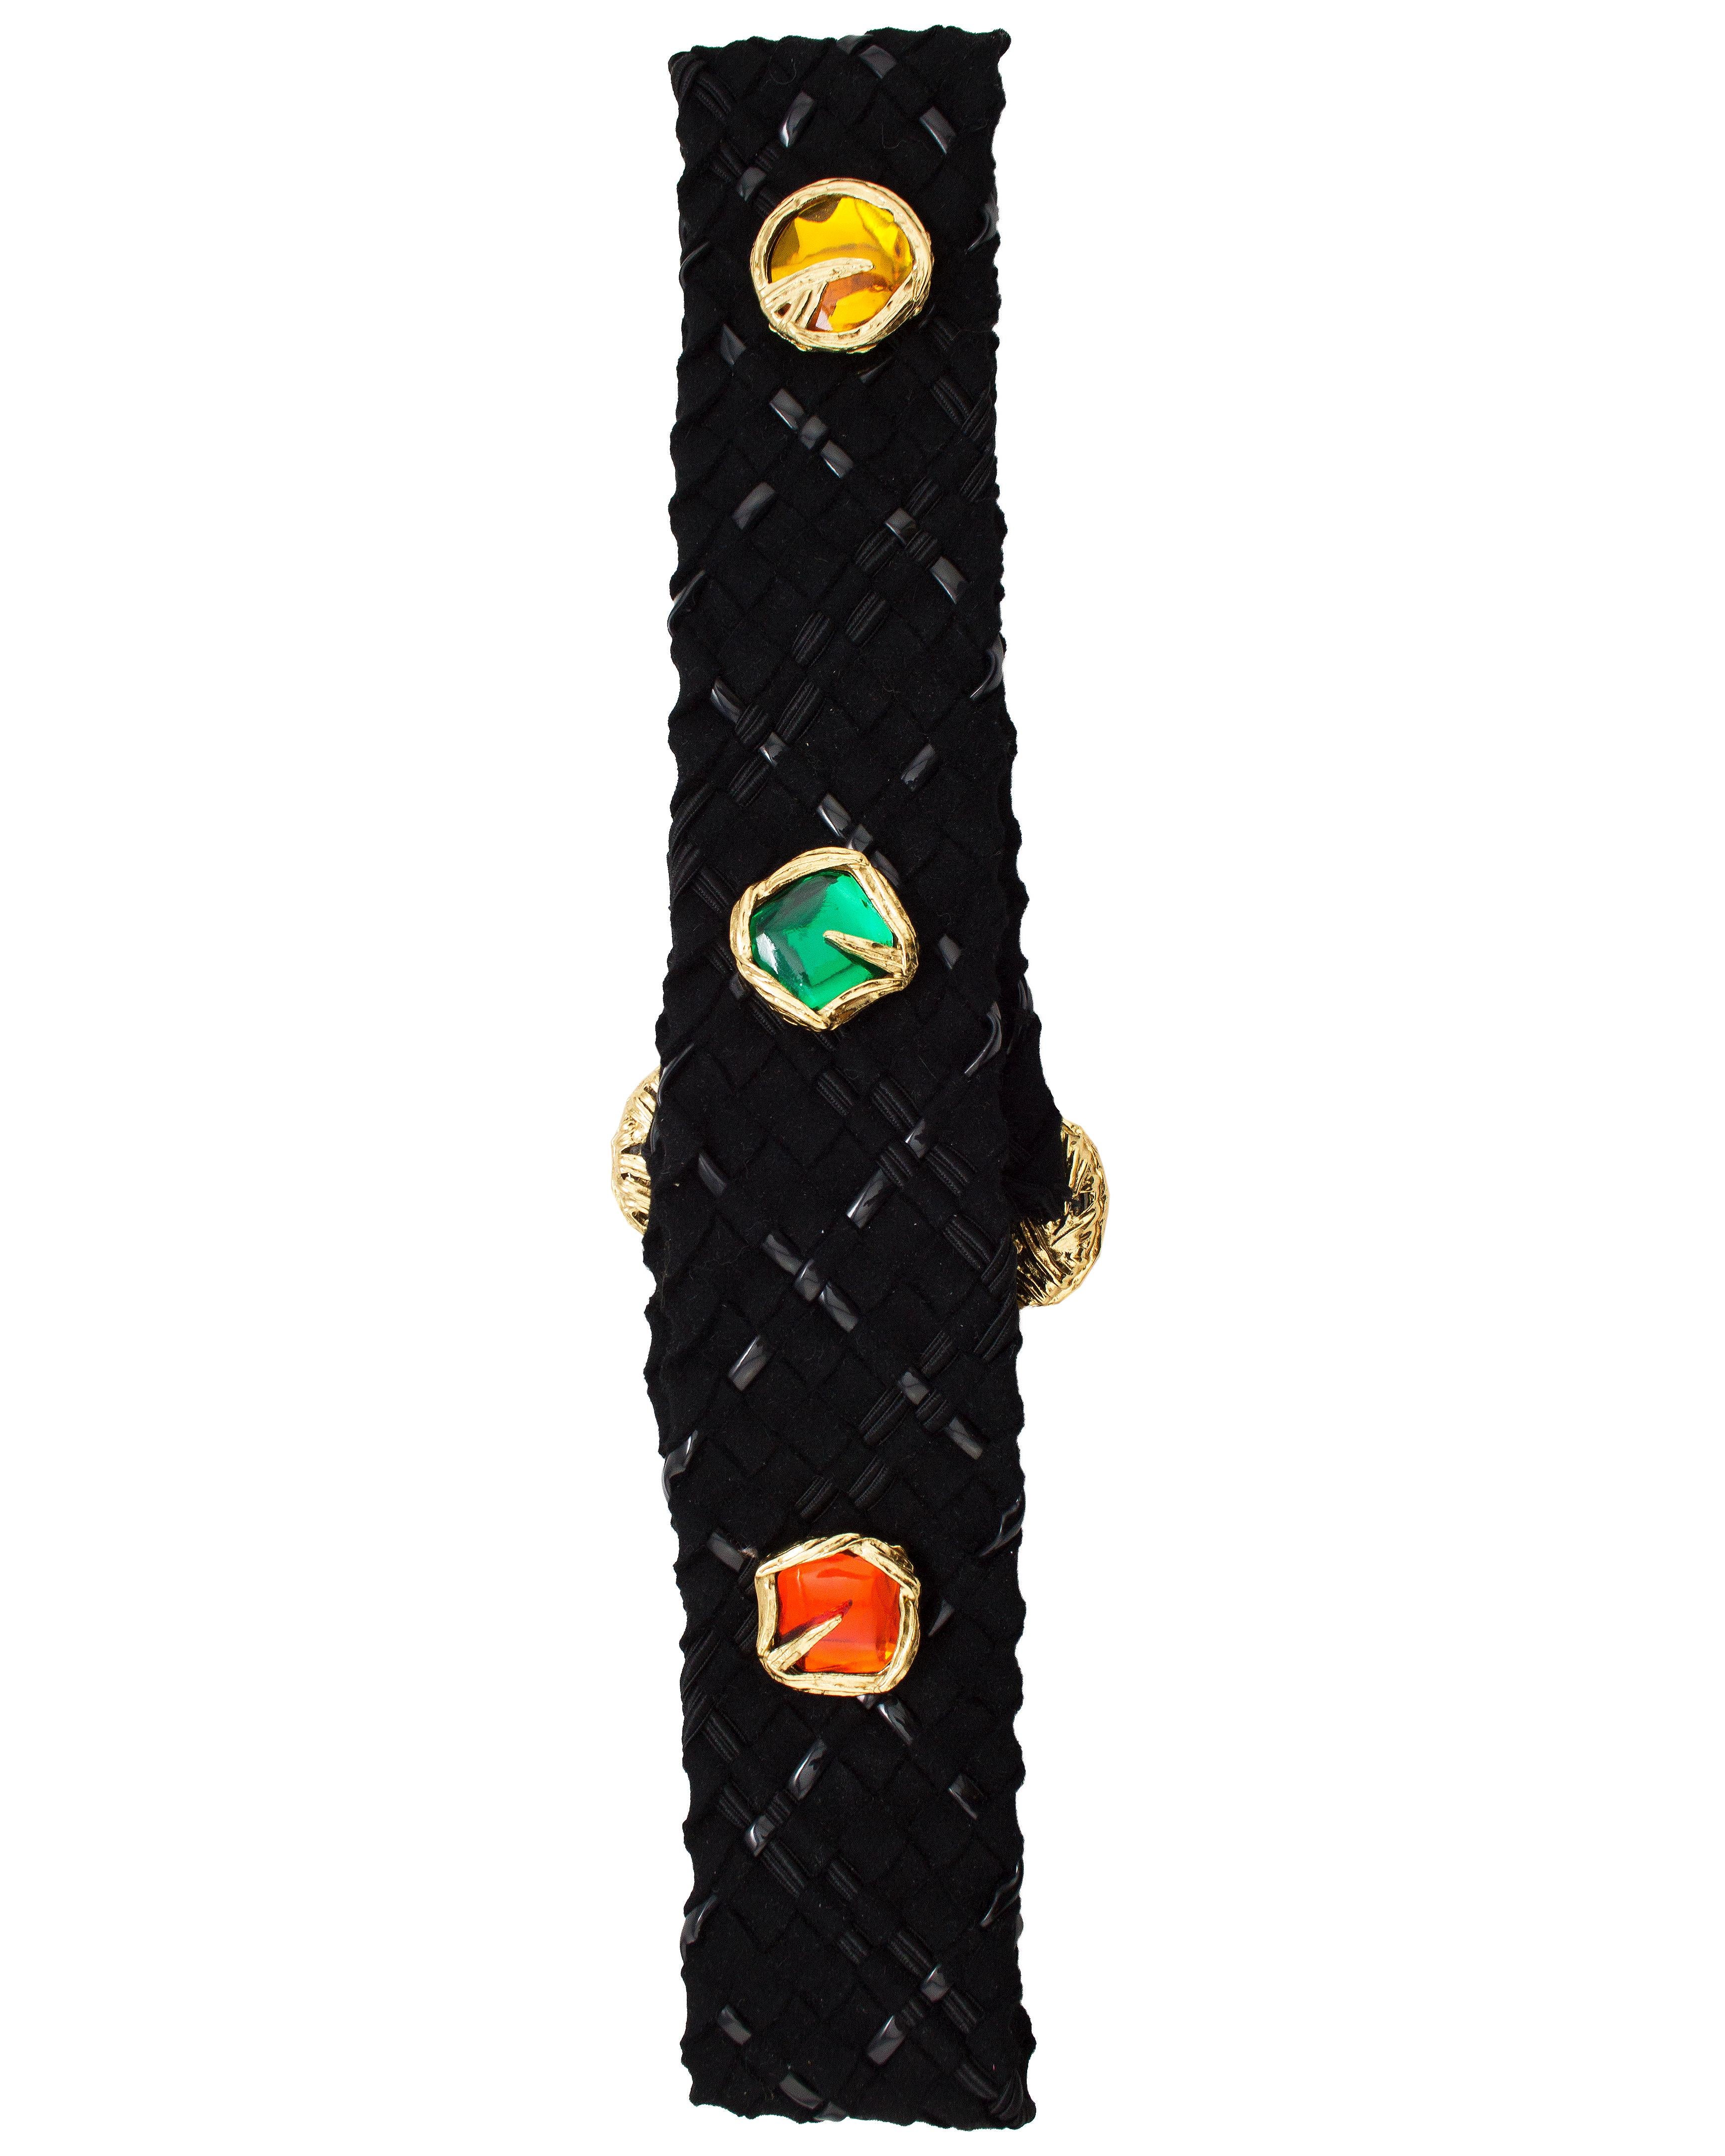 1980s Yves Saint Laurent Rive Gauche woven black faux suede and vinyl. Large gold tone and multi-coloured poured glass detail with a small Y motif detail on the centre amber stone. Five 1